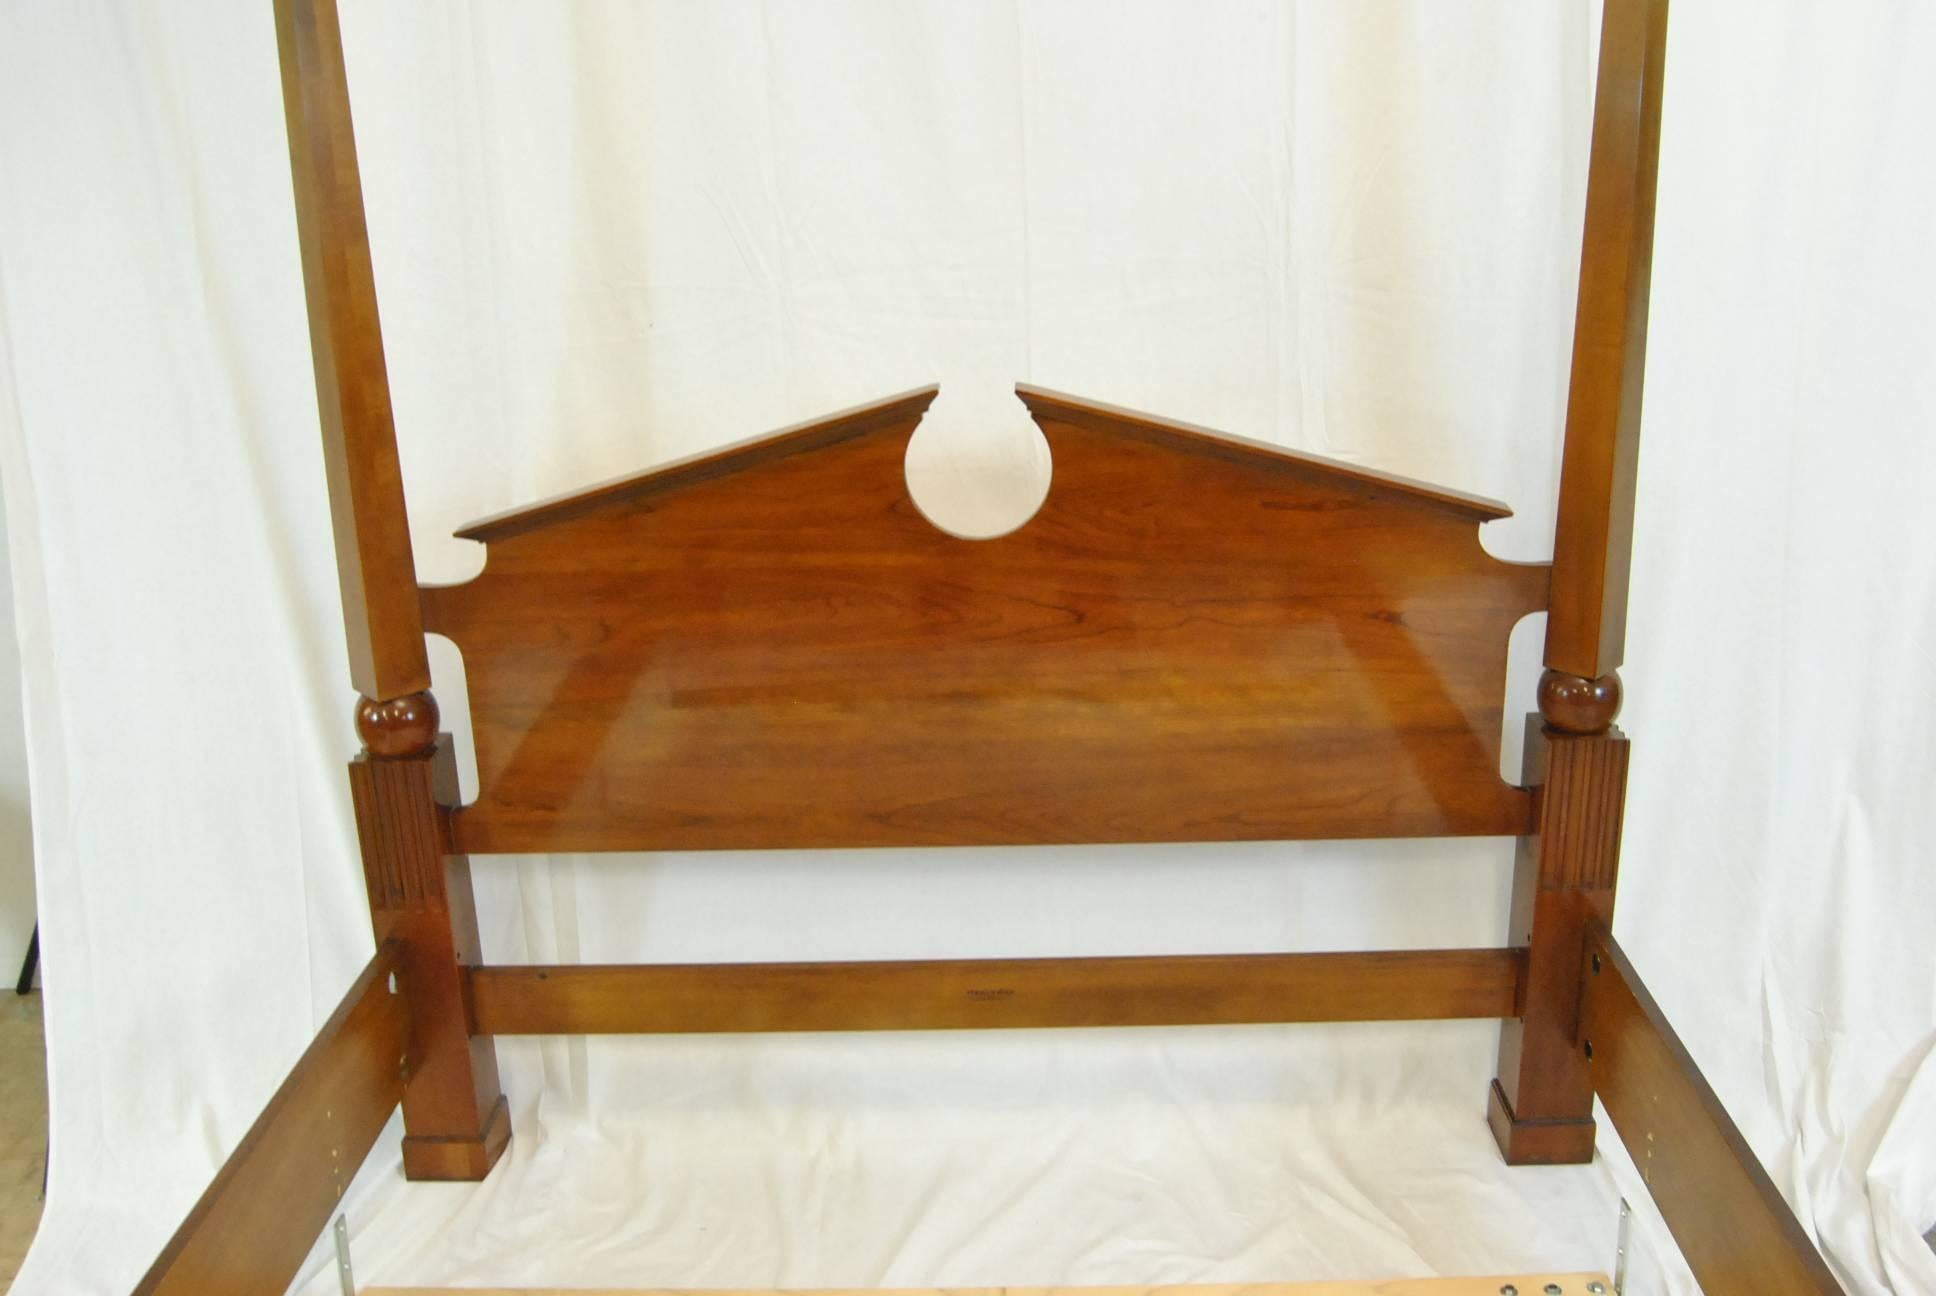 queen size canopy bed frame